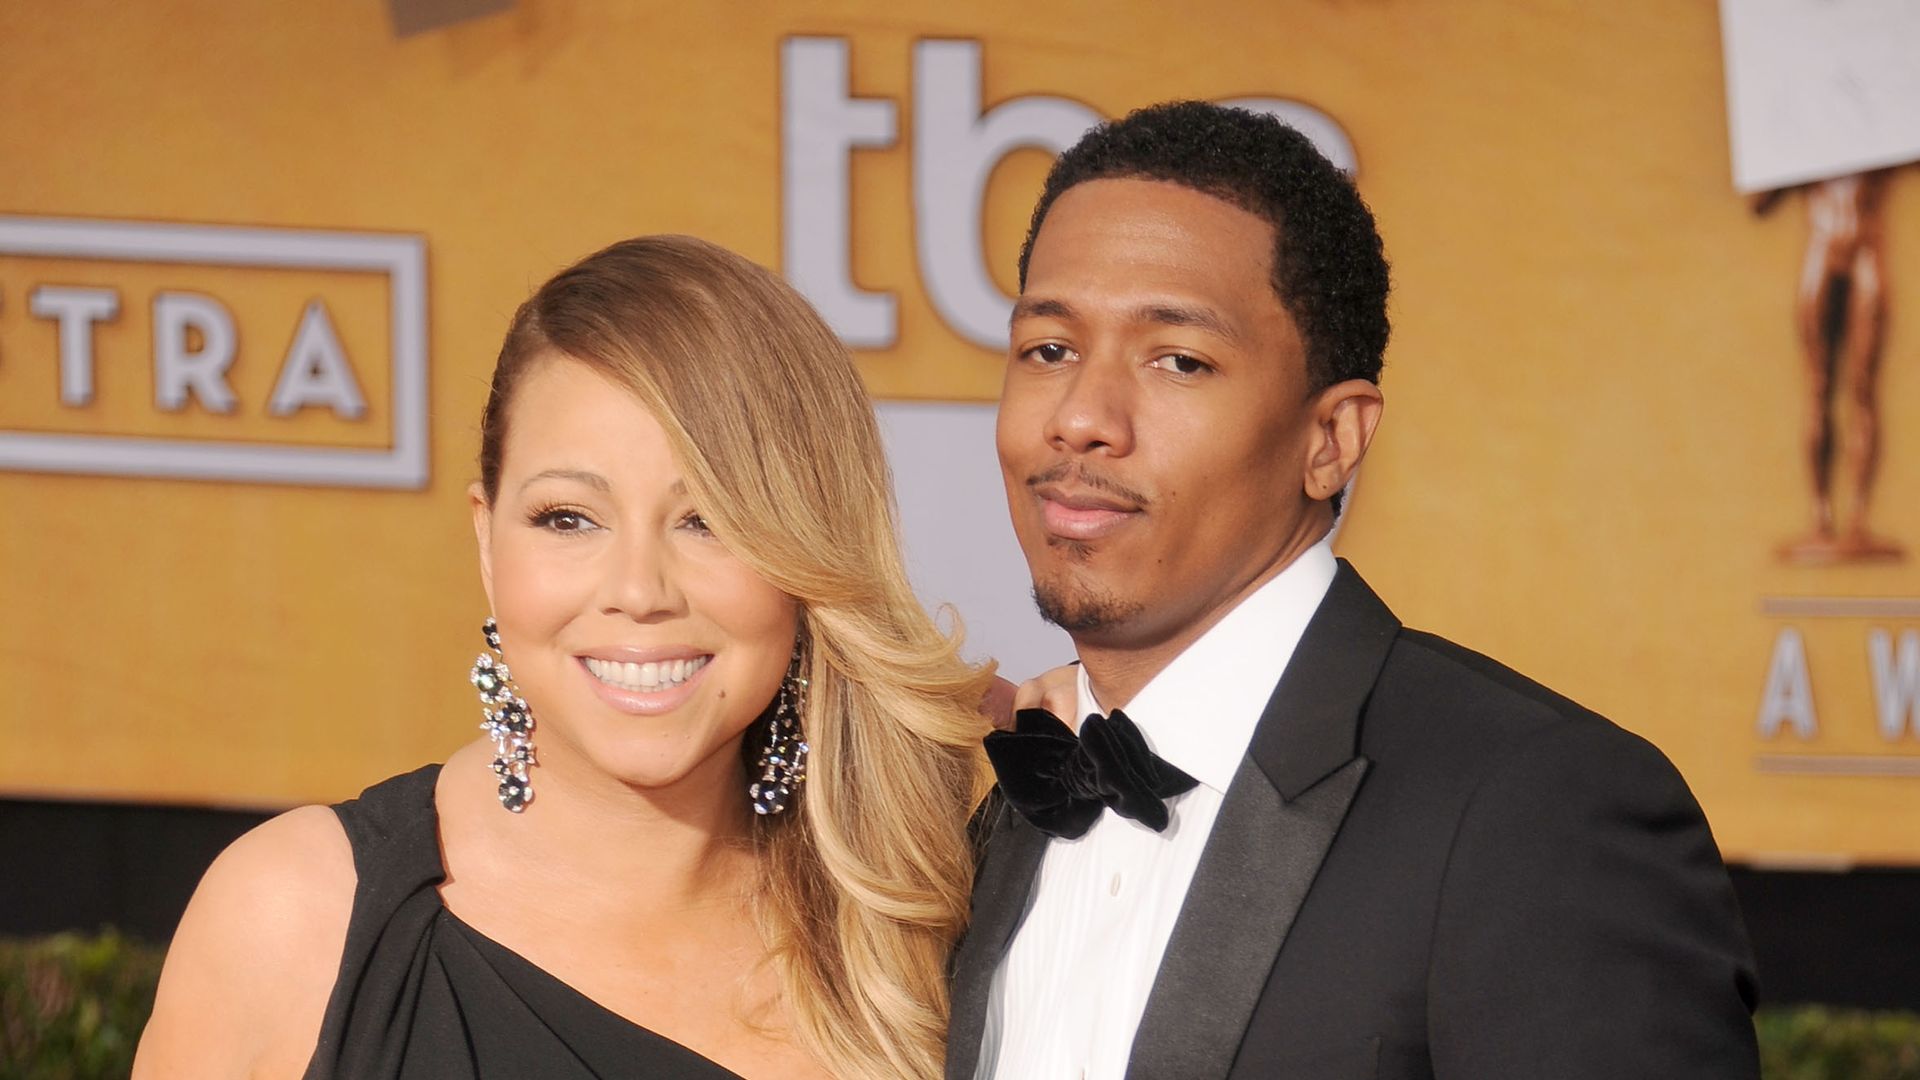 Inside Mariah Carey's twins' epic 13th birthday with Western theme hosted by dad Nick Cannon